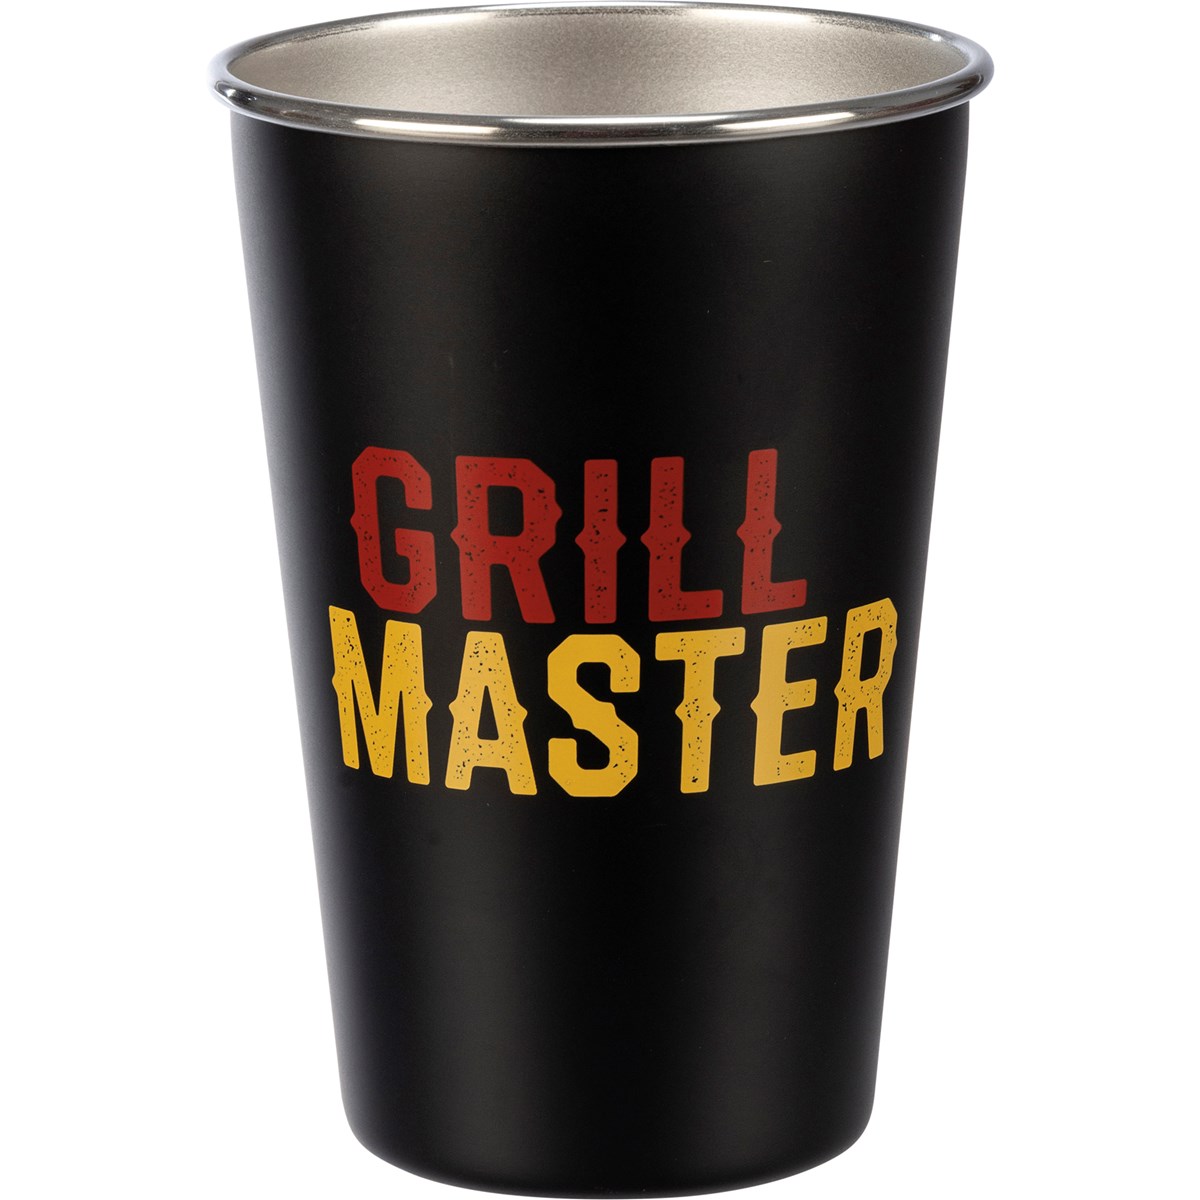 Pint - Grill Master - 16 oz., 3.50" Diameter x 4.75" - Stainless Steel